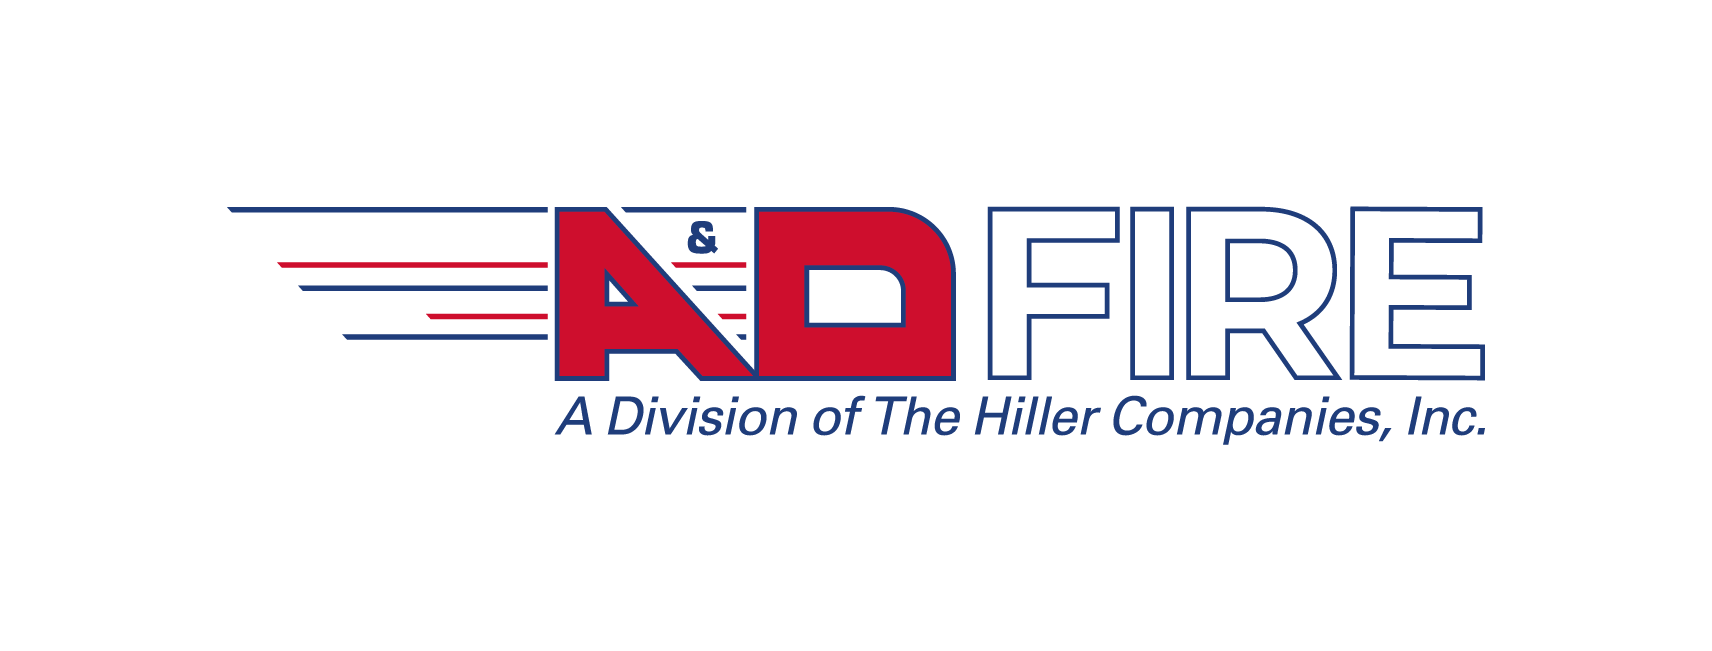 The Hiller Companies purchases A&D Fire headquartered in San Diego, California.